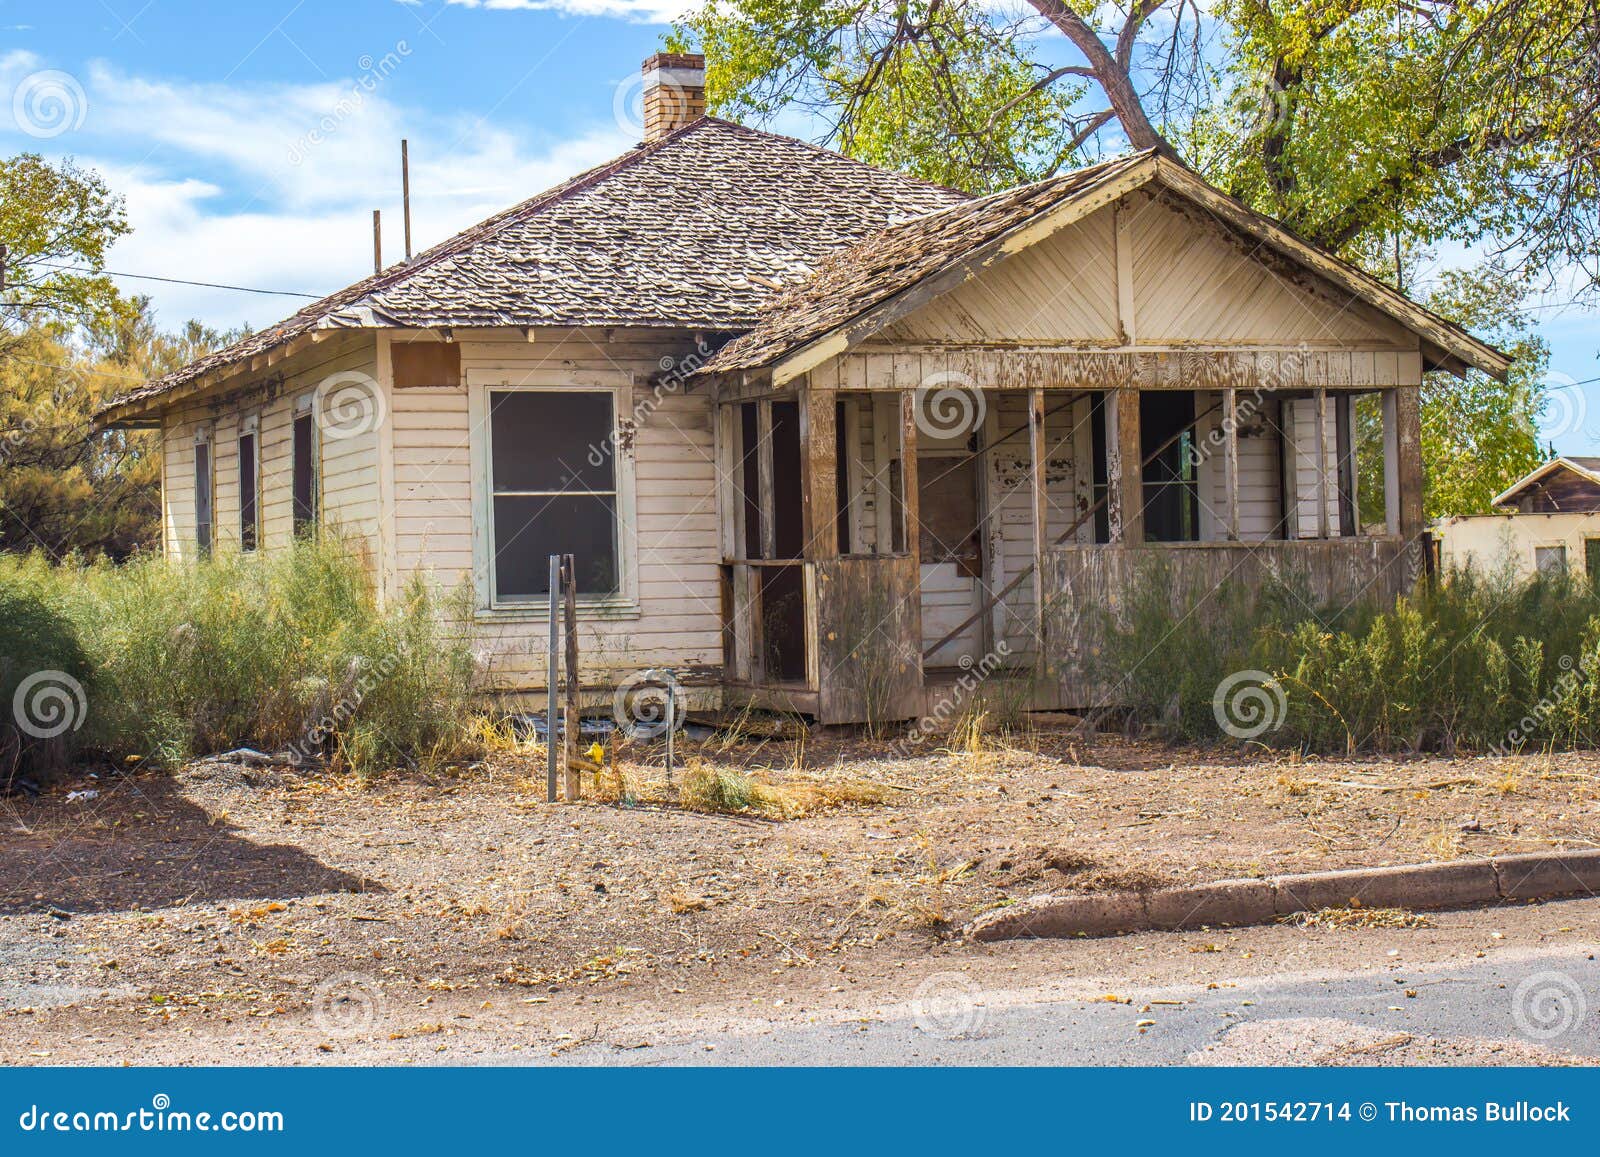 old abandoned one level house in disrepair